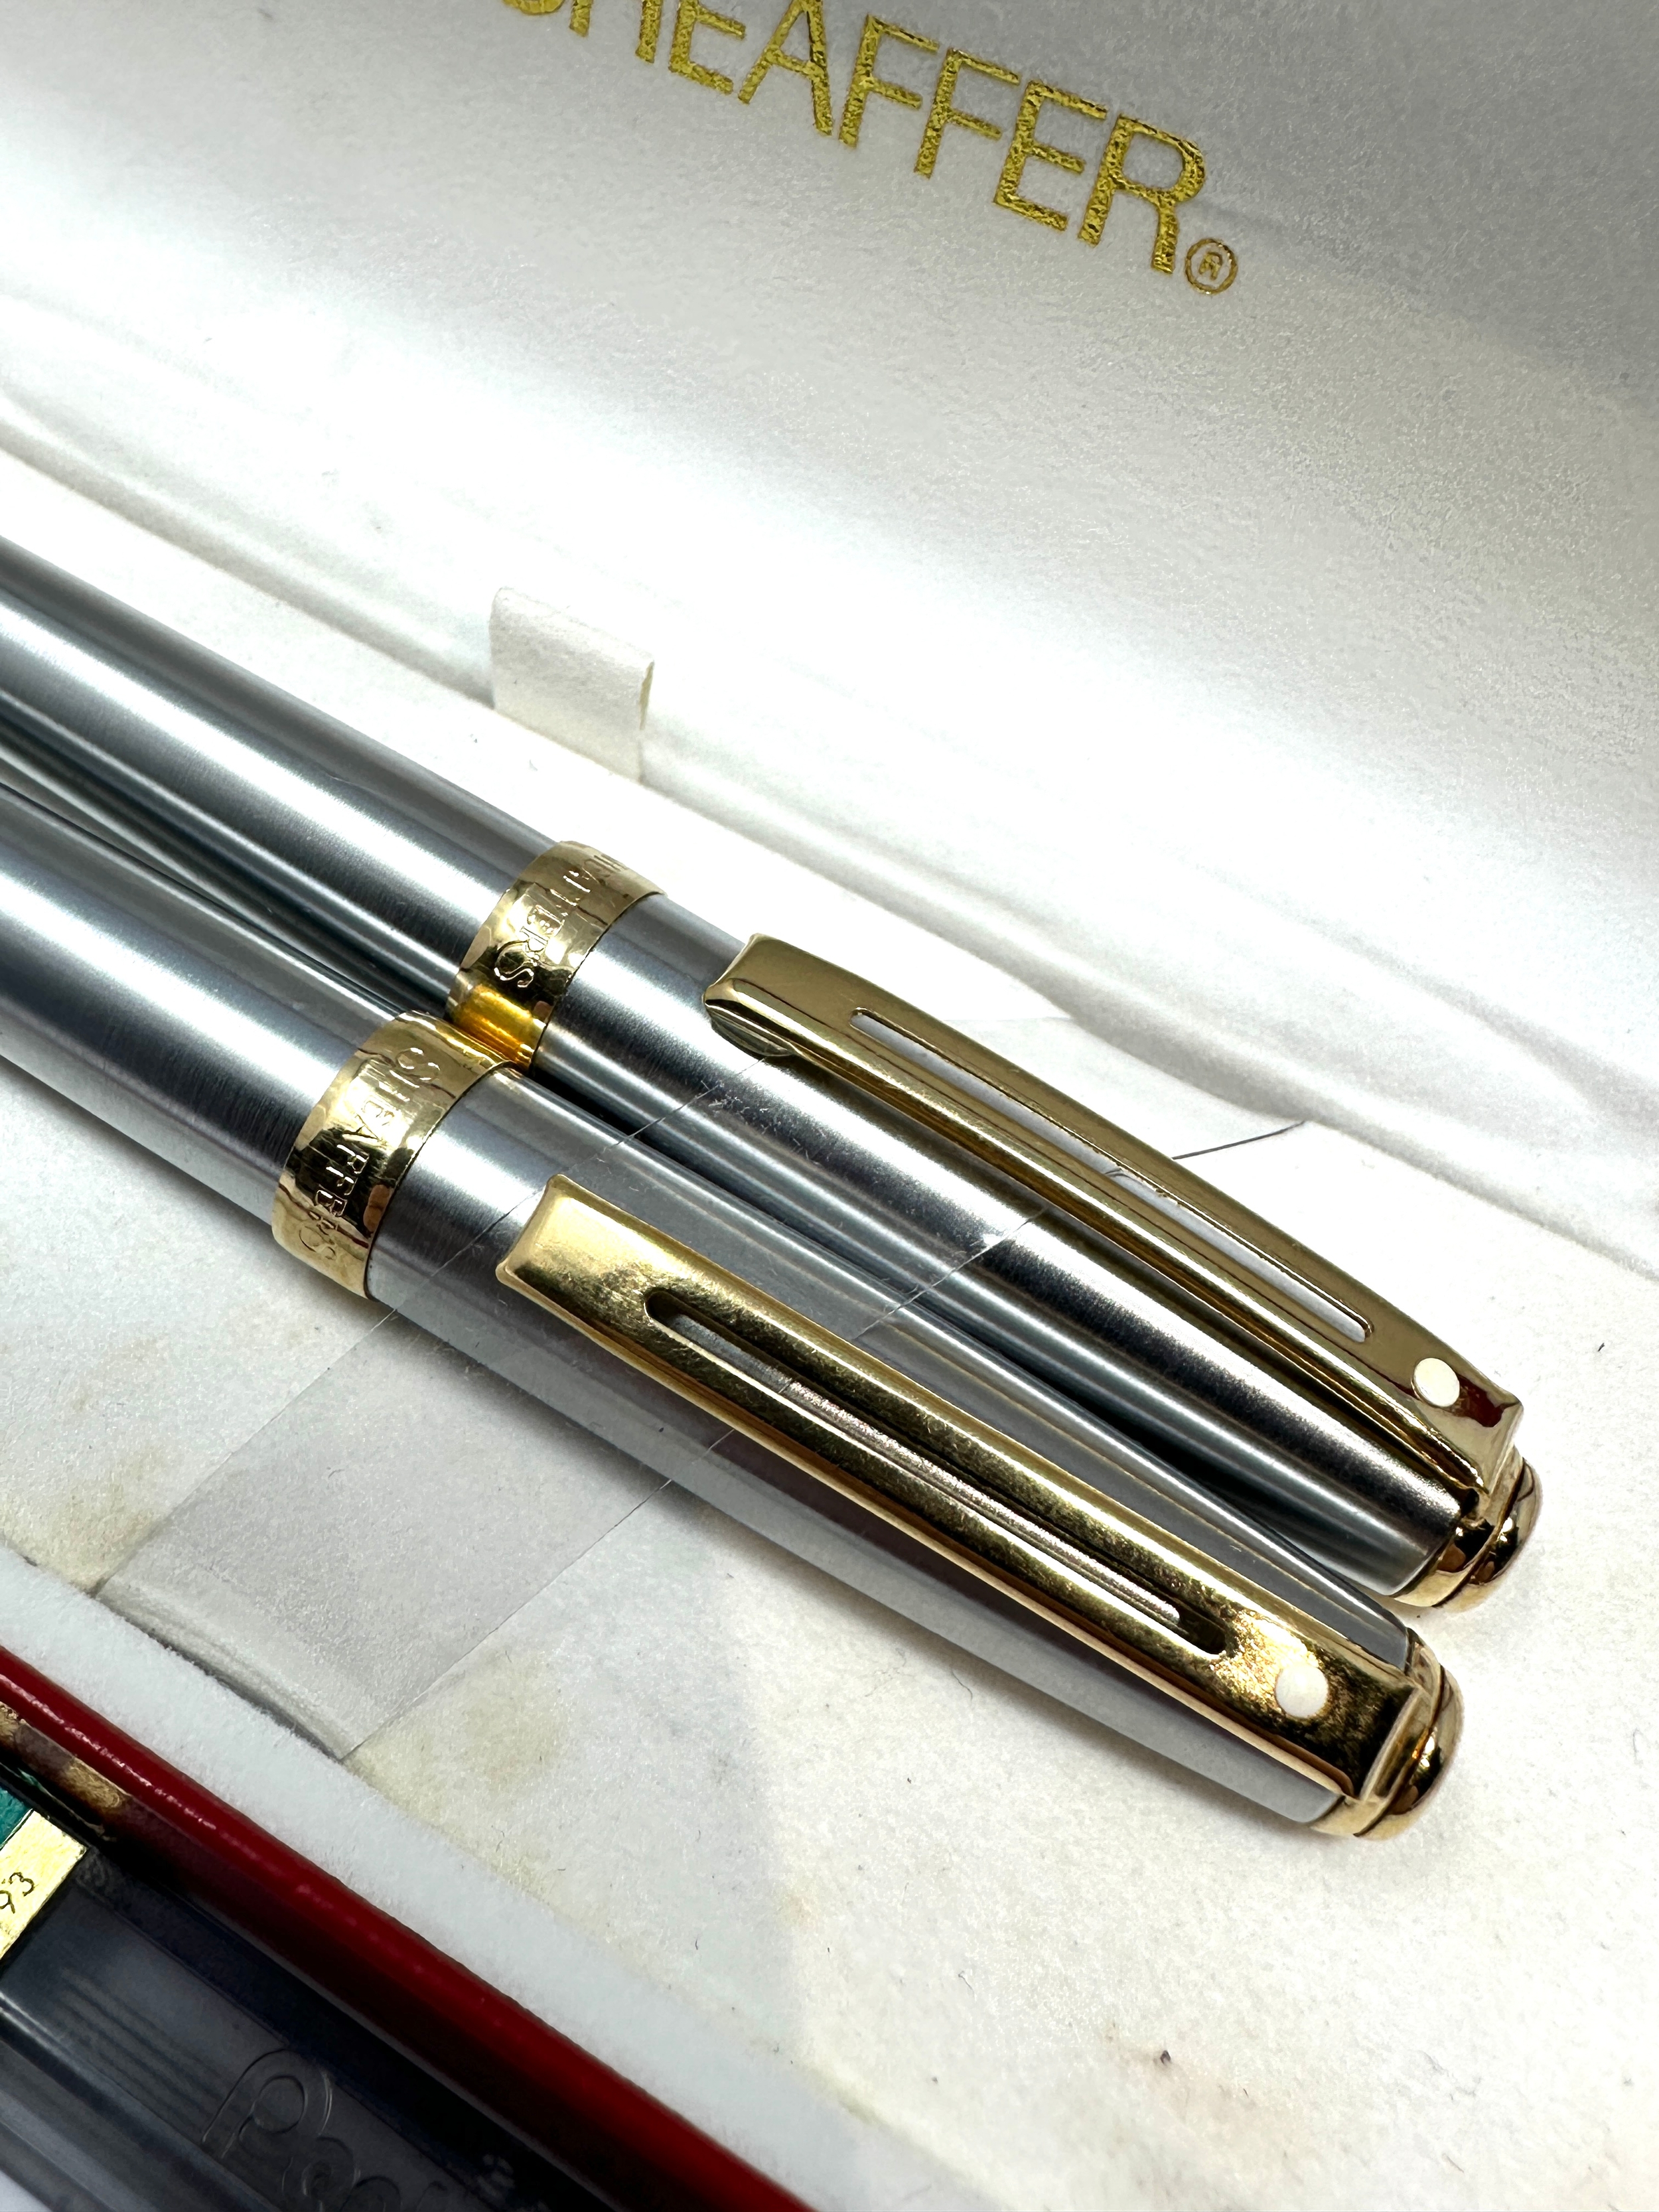 As new boxed sheaffer ballpoint pen & pencil - Image 3 of 4